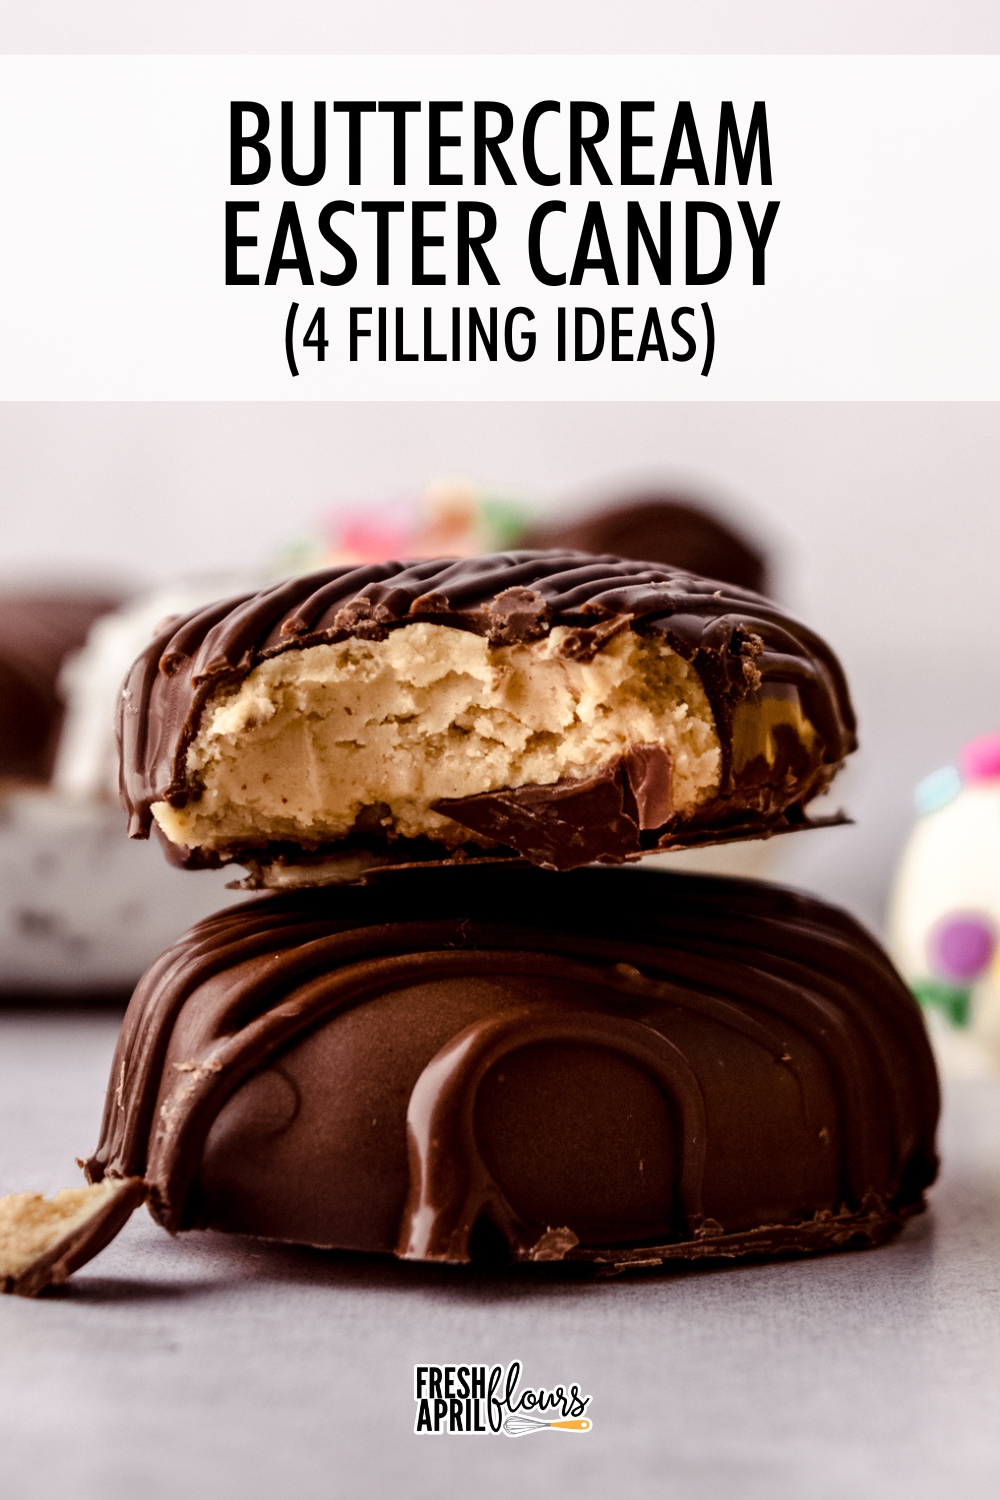 Let me teach you how to make your own Easter egg buttercream candies. This recipe includes variations for classic vanilla buttercream filling as well as funfetti buttercream filling, coconut buttercream filling, and peanut butter filling. via @frshaprilflours